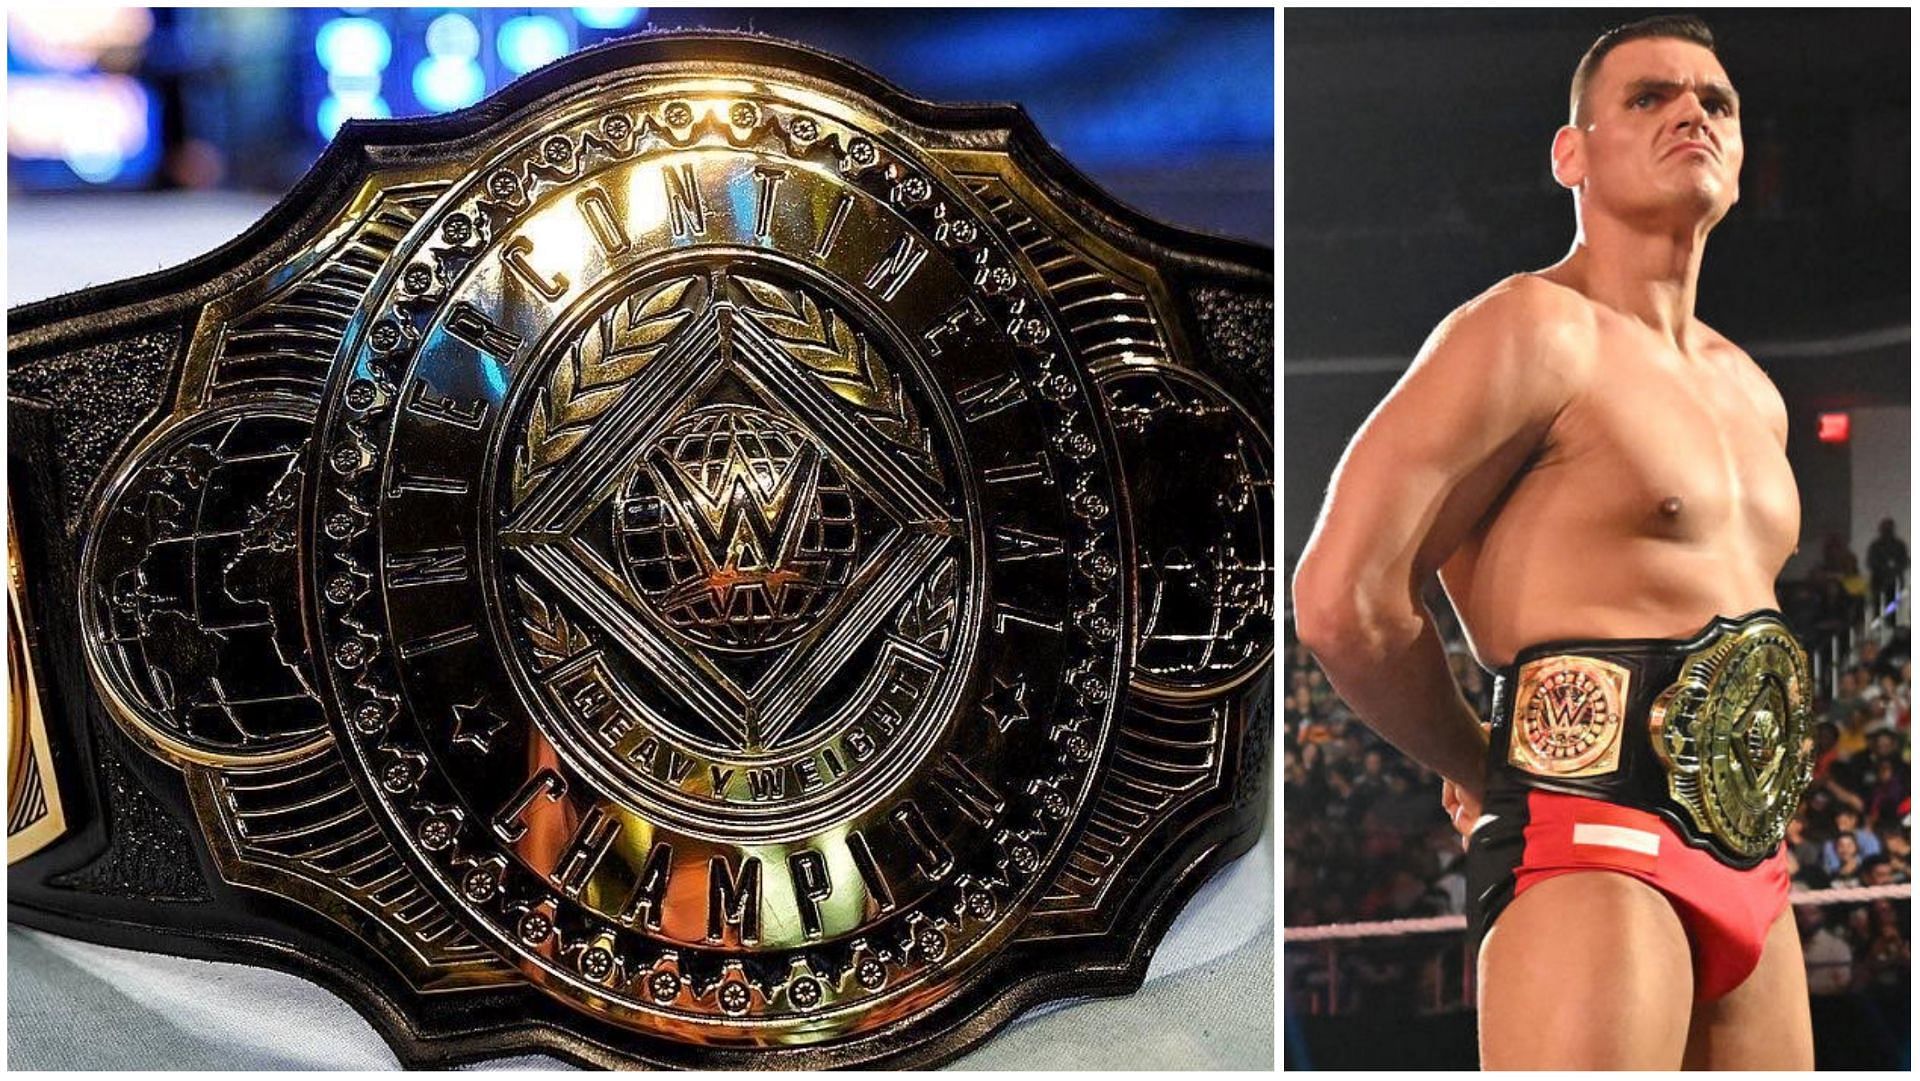 The WWE Intercontinental Championship belt and its current holder Gunther 